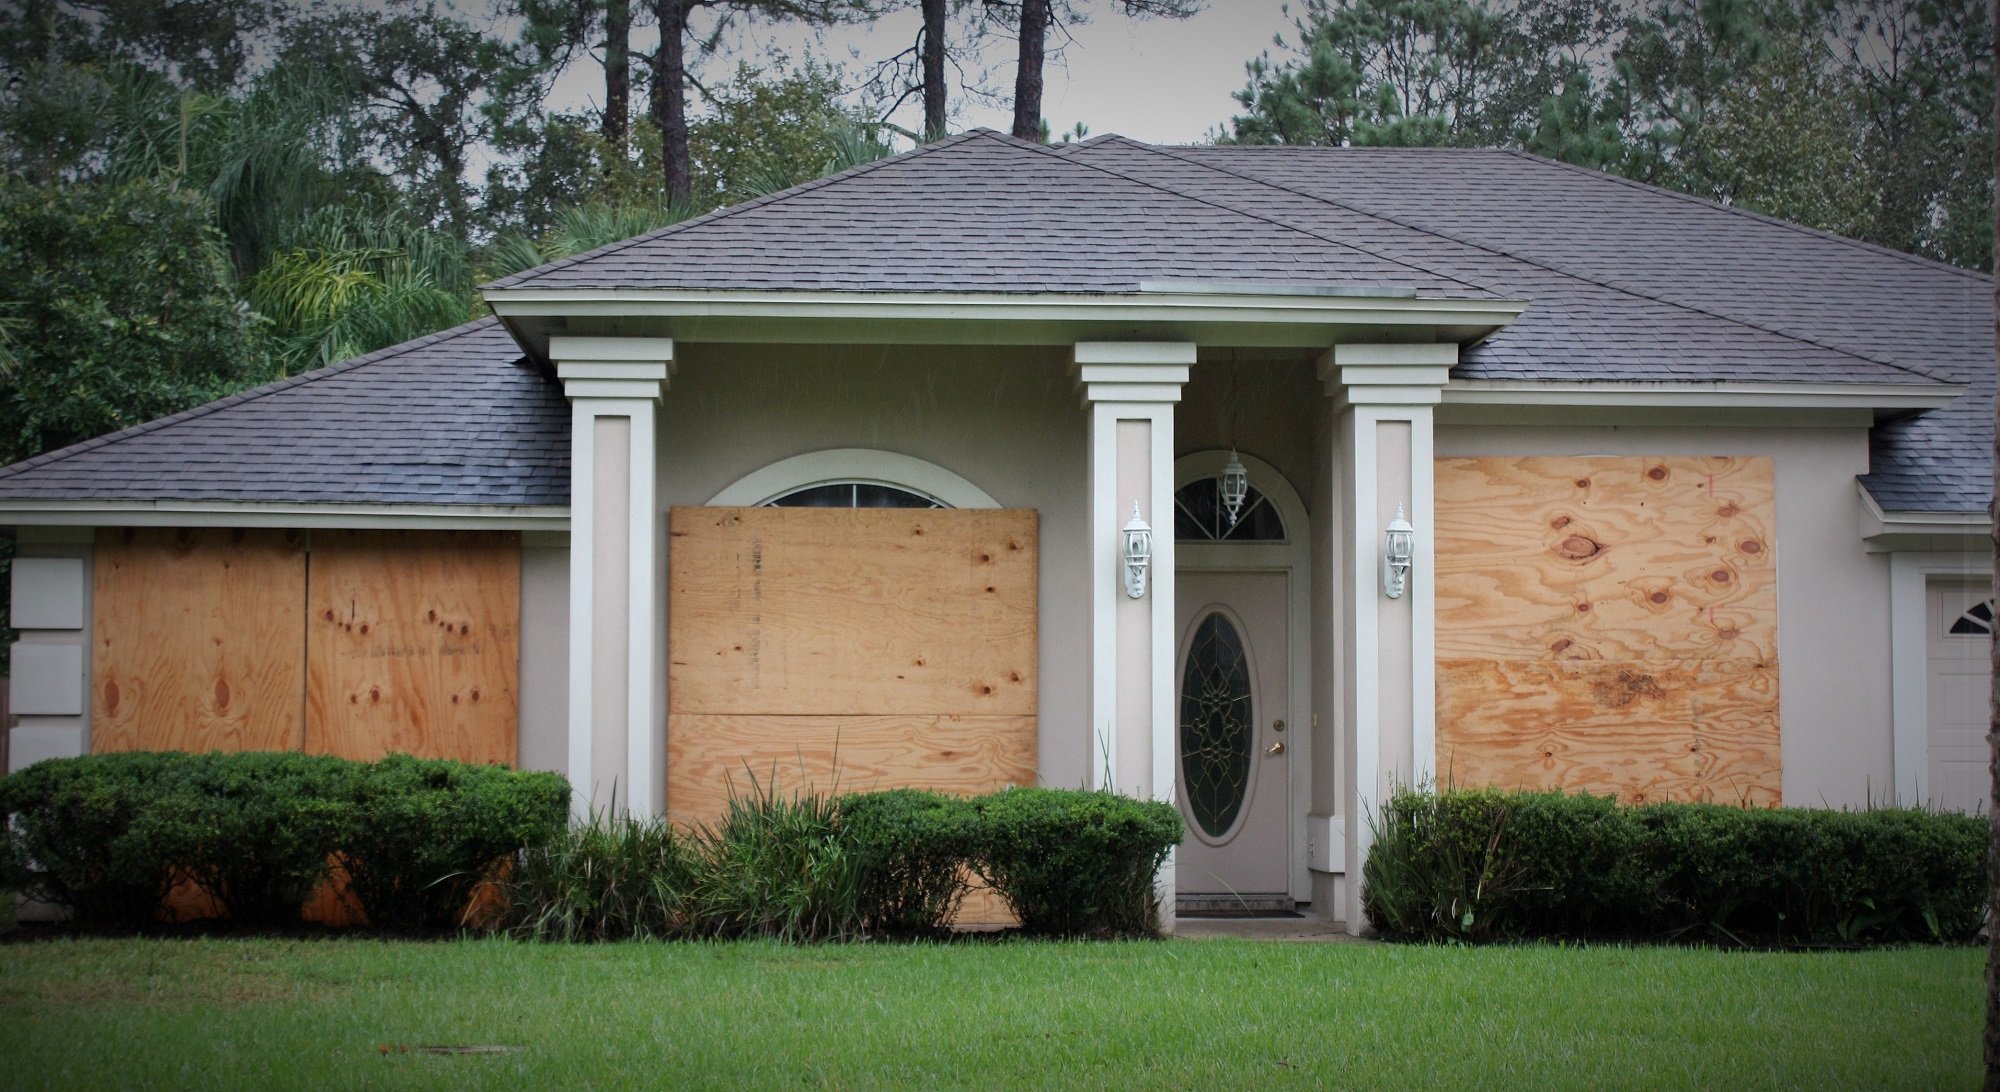 Boarding up your home for a hurricane